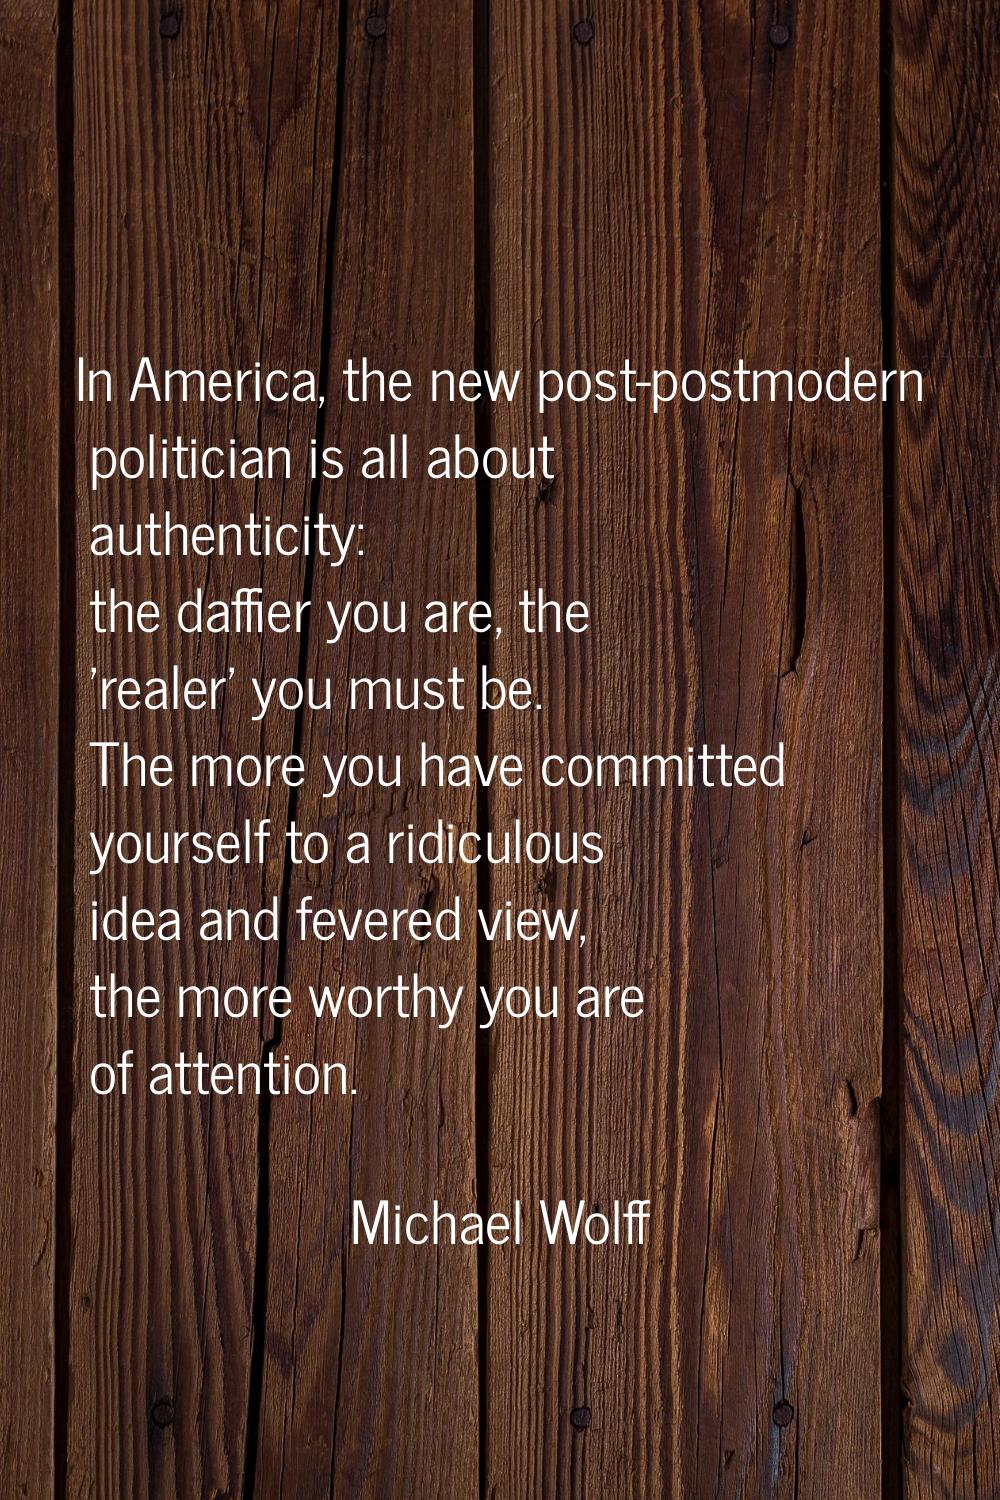 In America, the new post-postmodern politician is all about authenticity: the daffier you are, the 